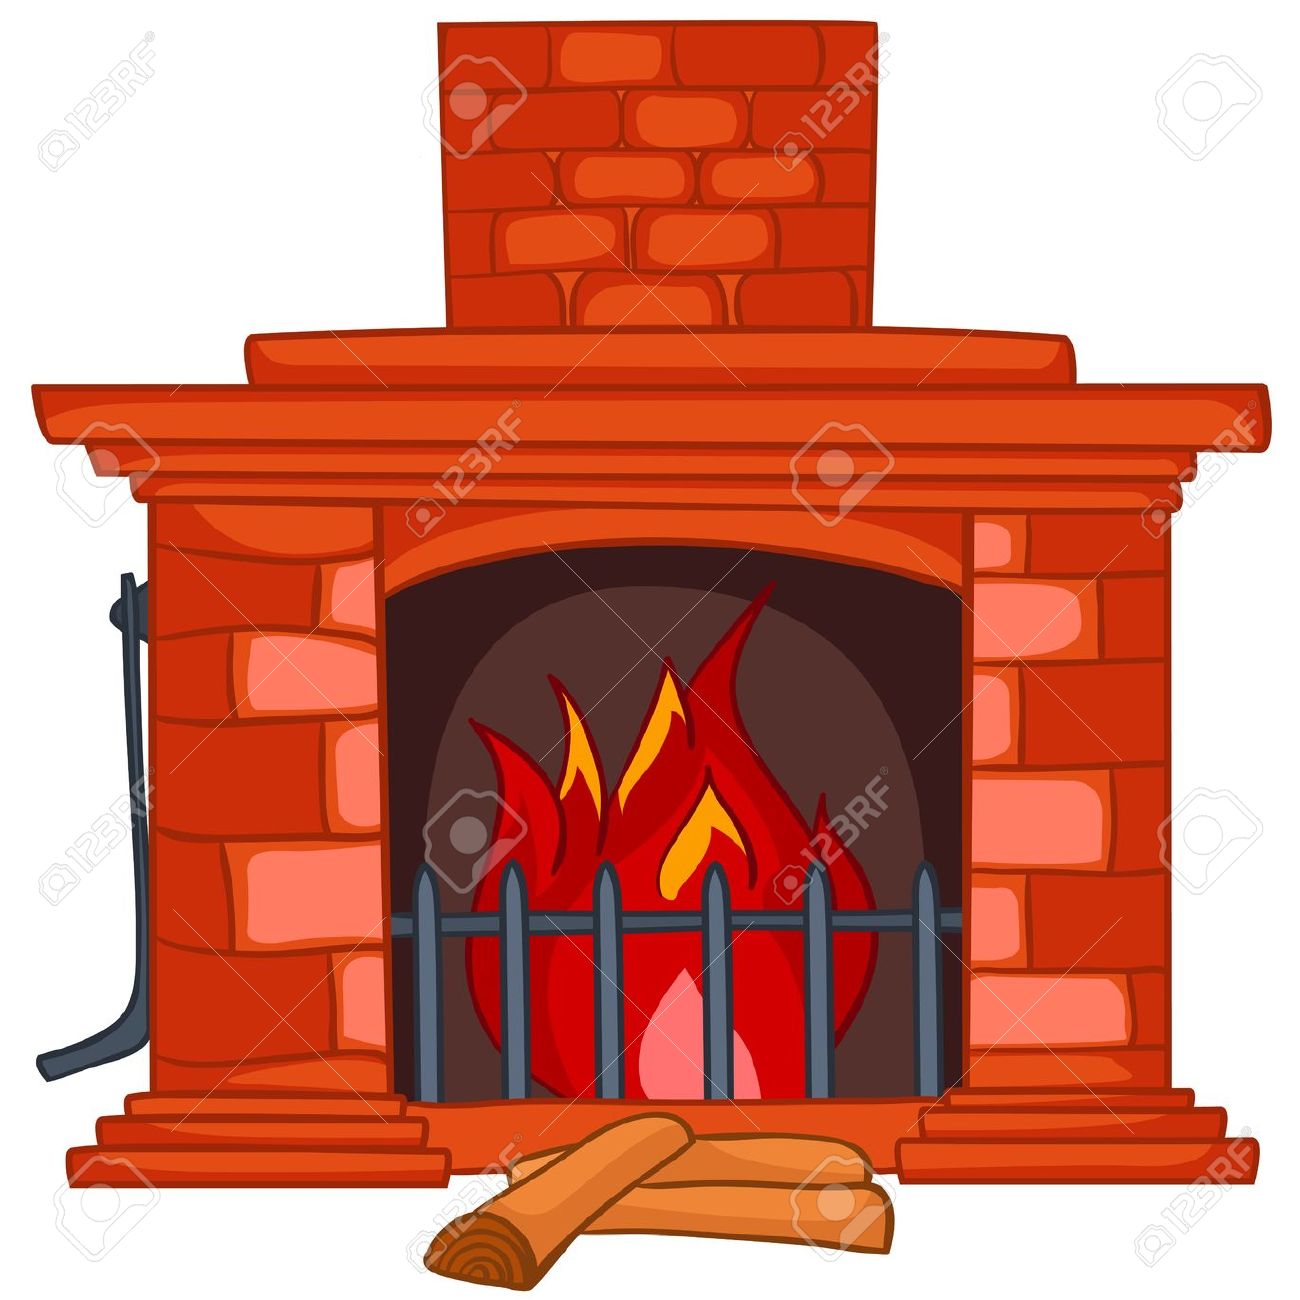 Christmas fireplace clipart t